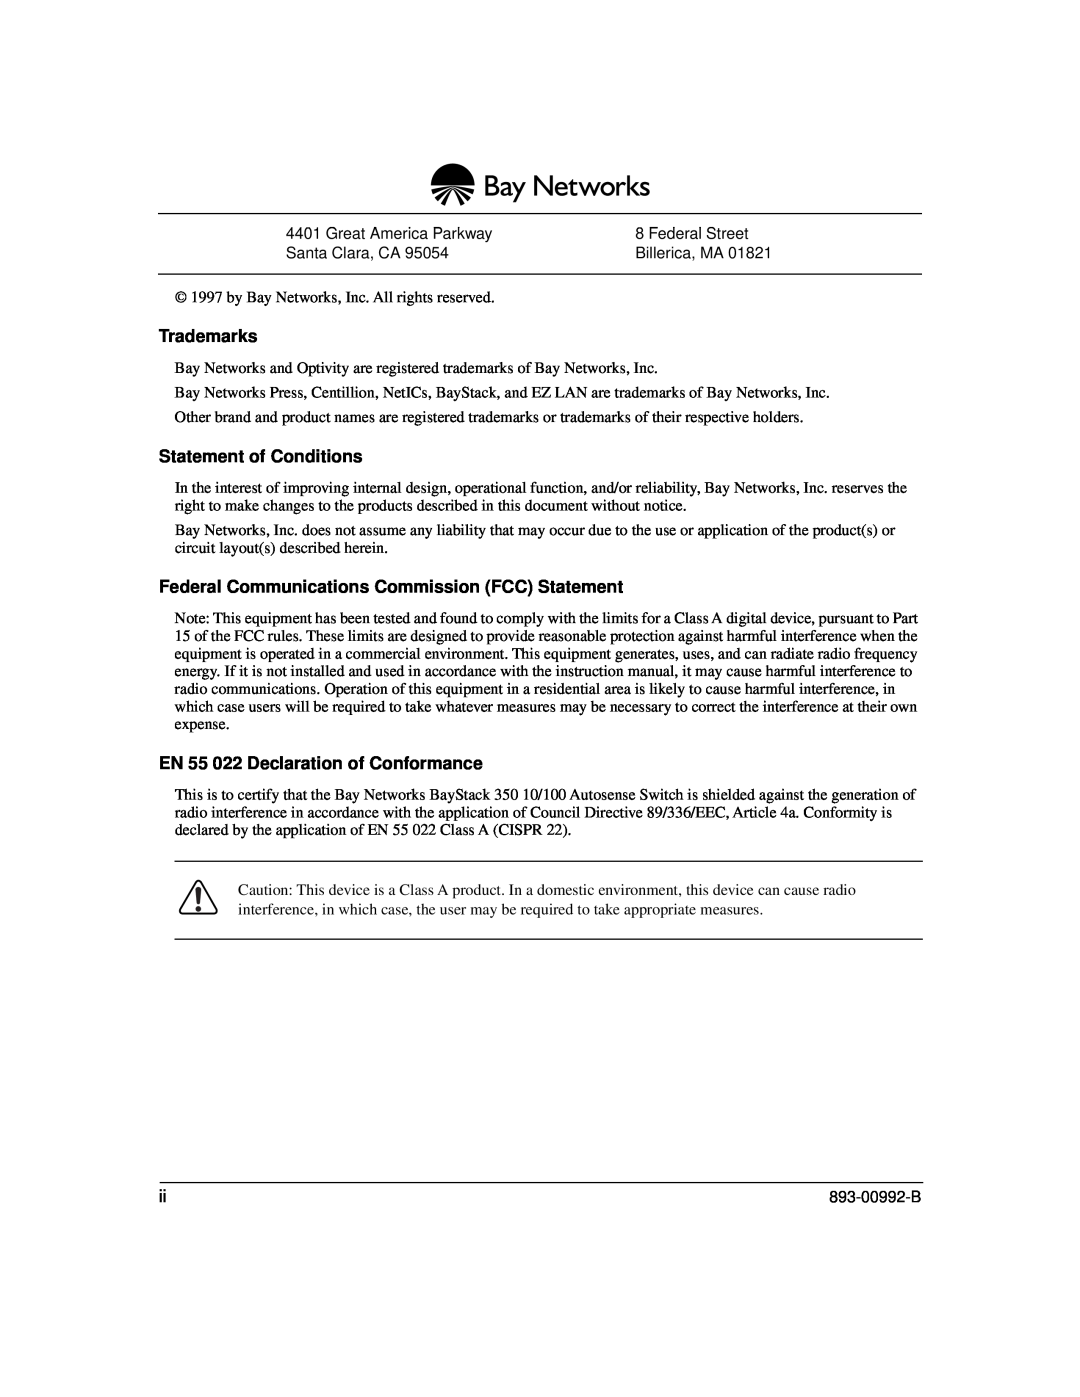 Bay Technical Associates 350 manual Trademarks, Statement of Conditions, Federal Communications Commission FCC Statement 